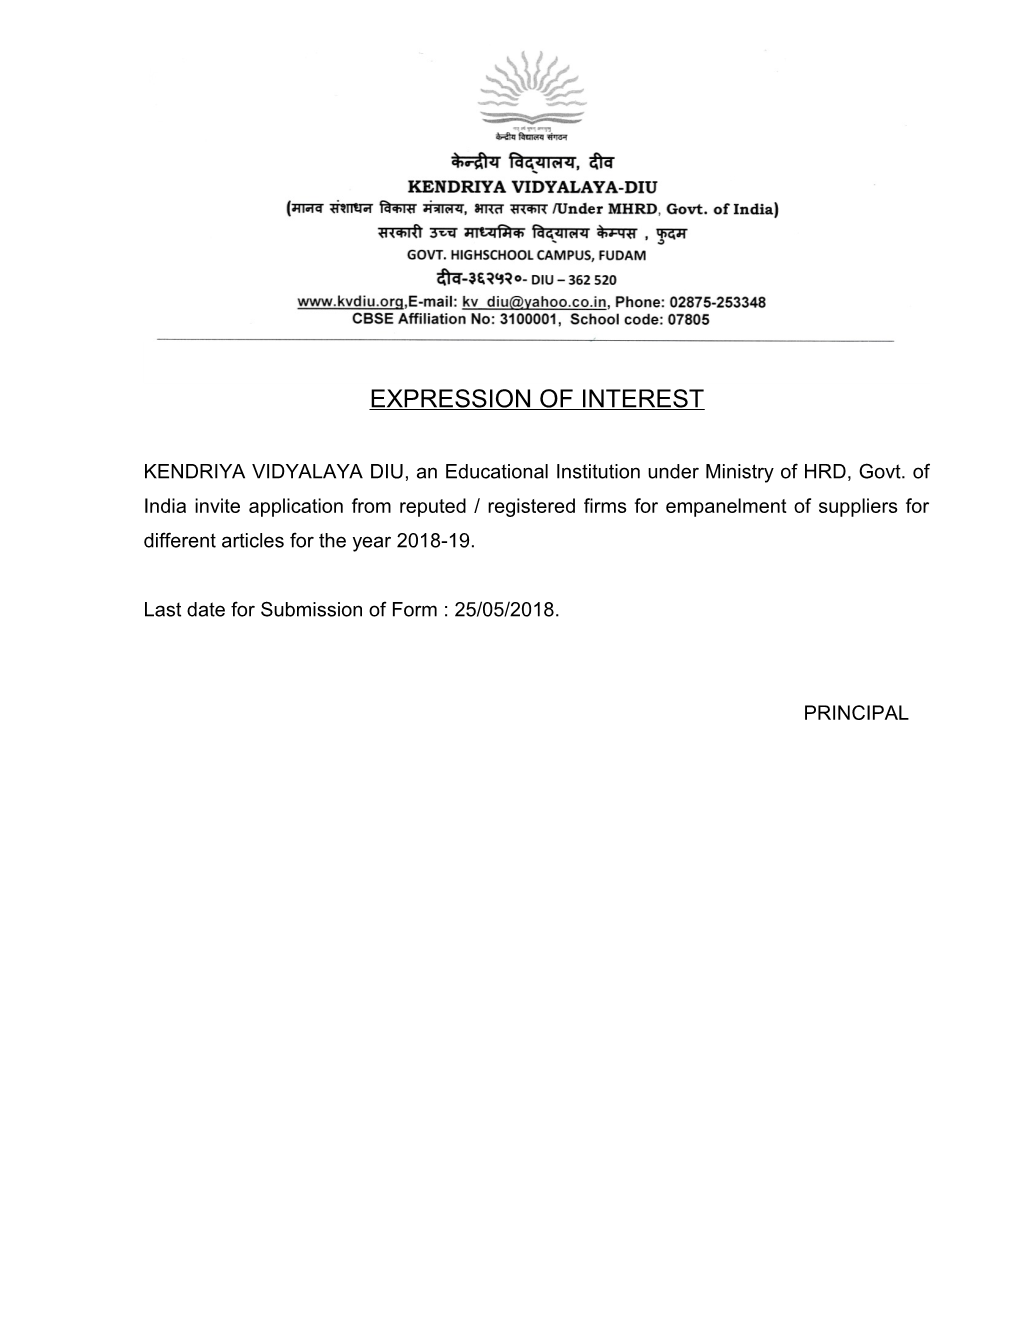 Last Date for Submission of Form:25/05/2018